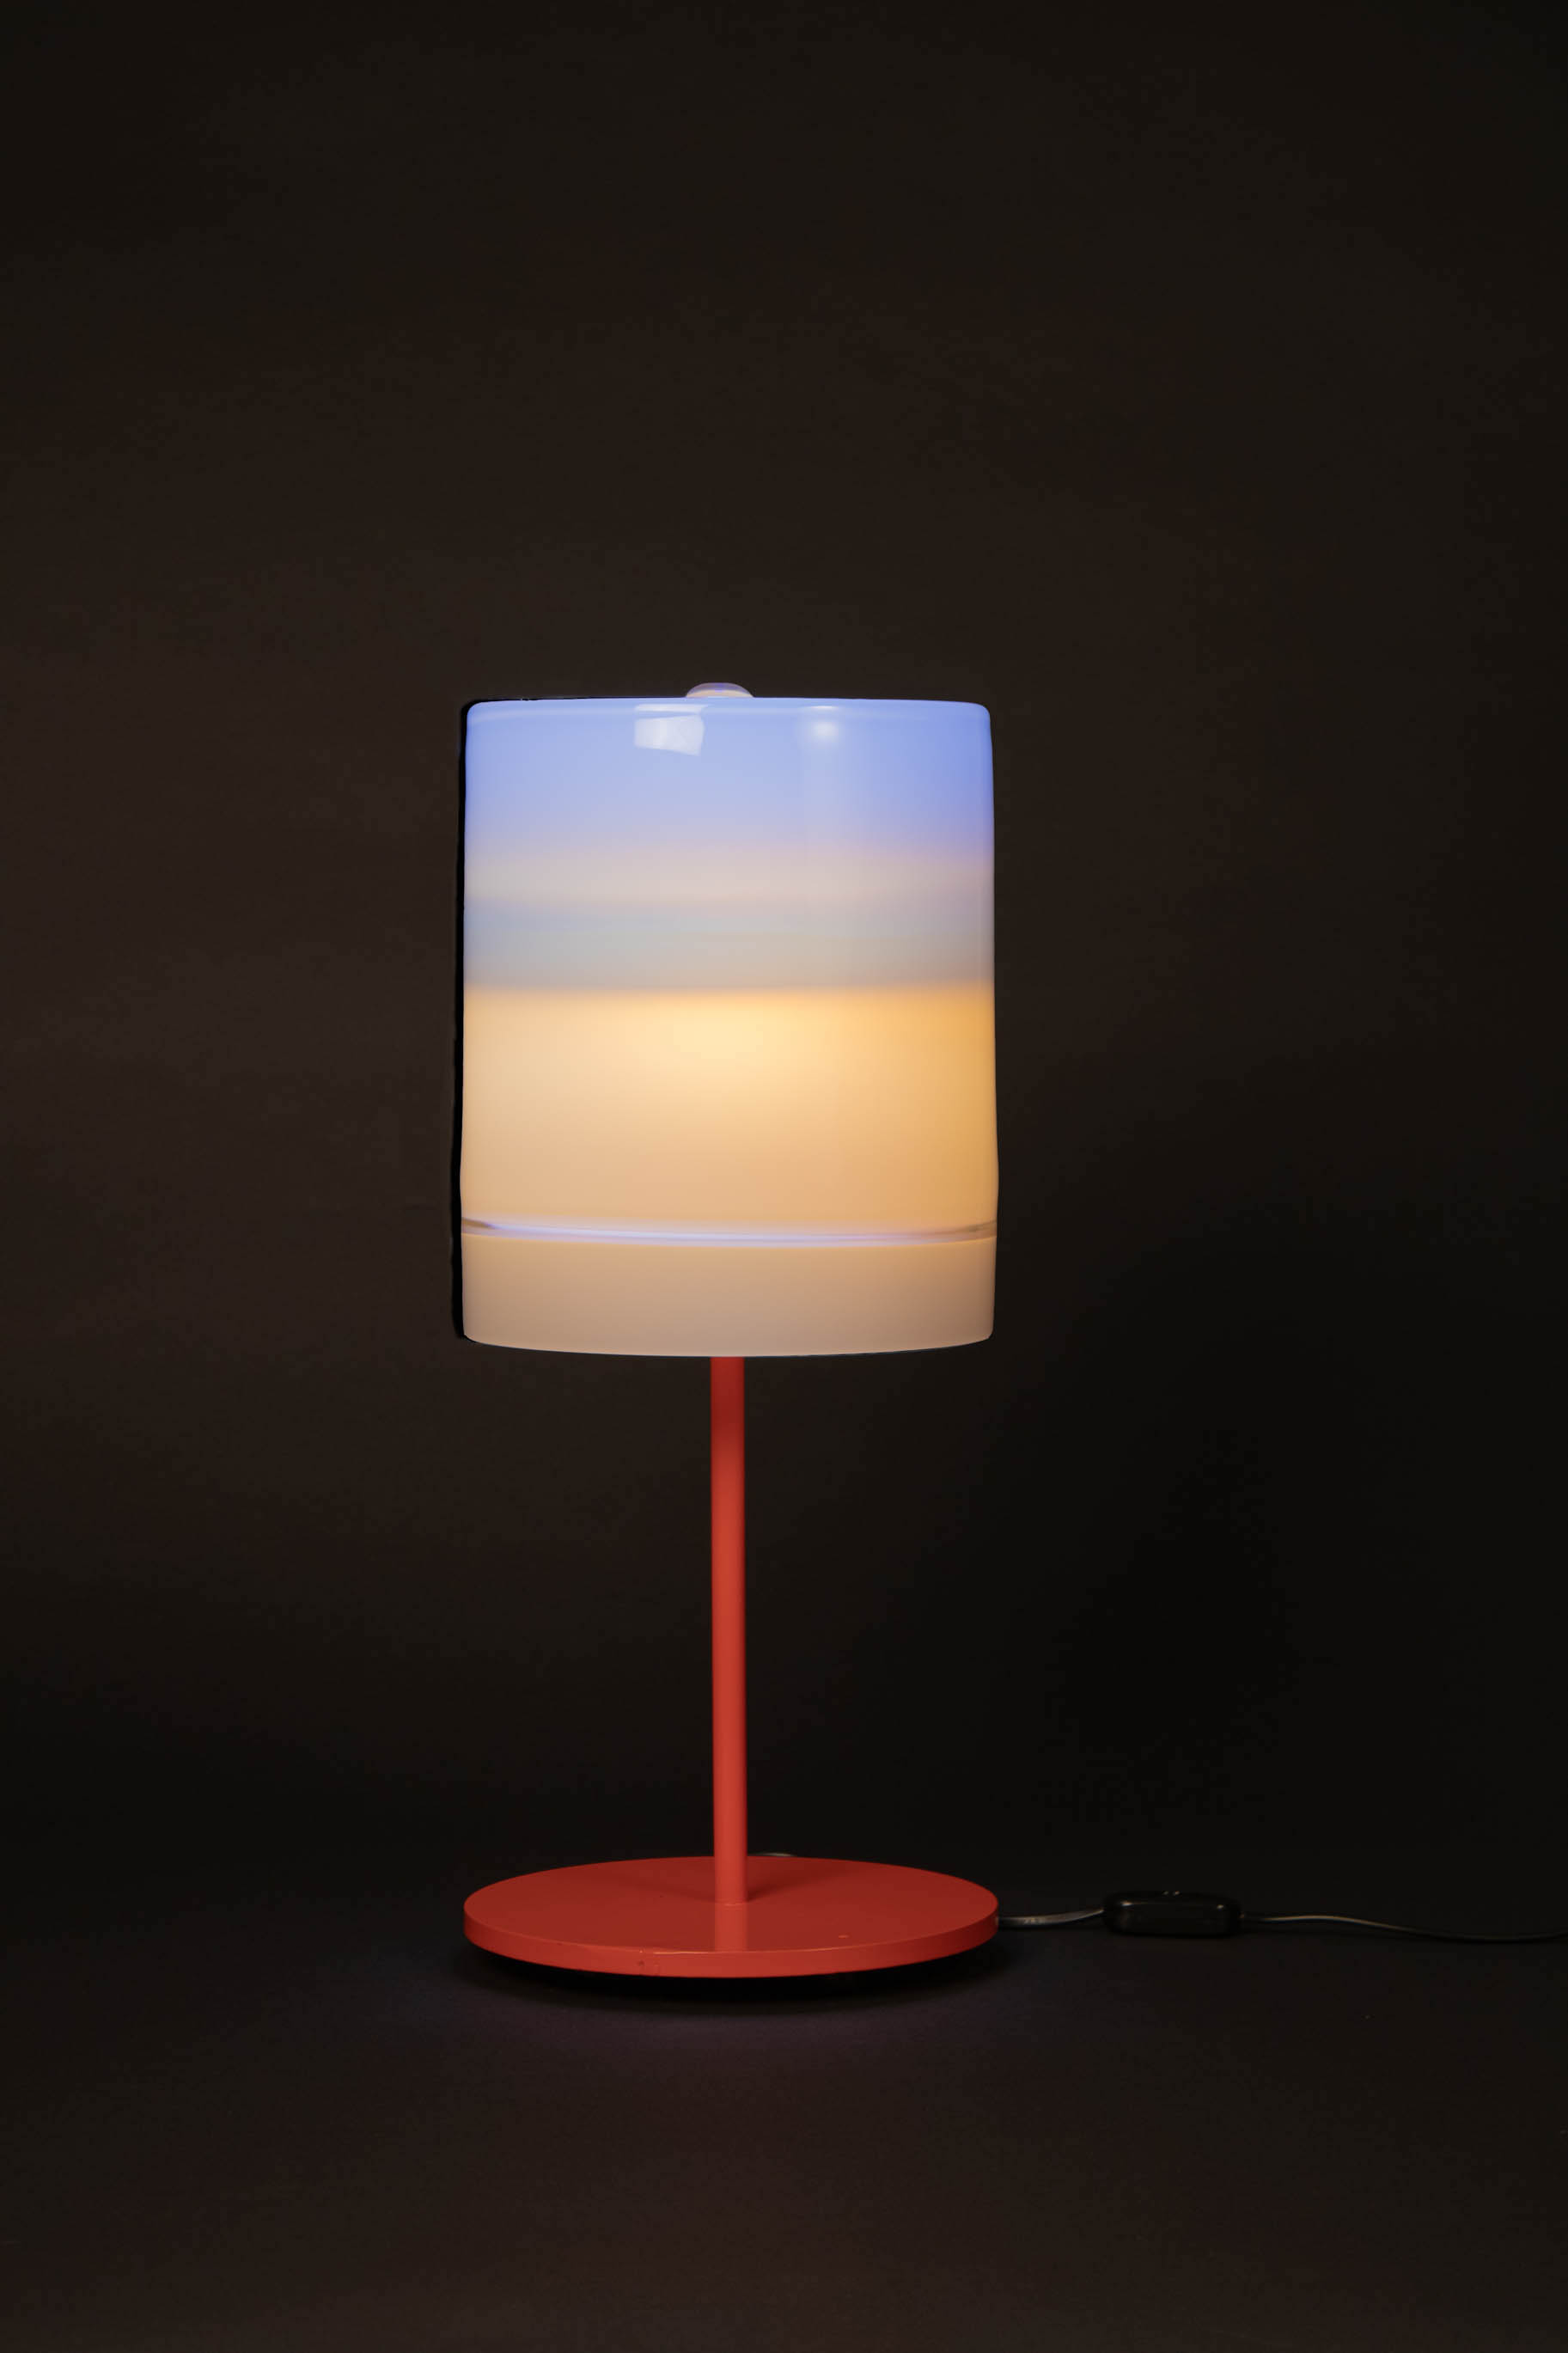 a lamp with a red metal base and white cylindrical shade against a black background.